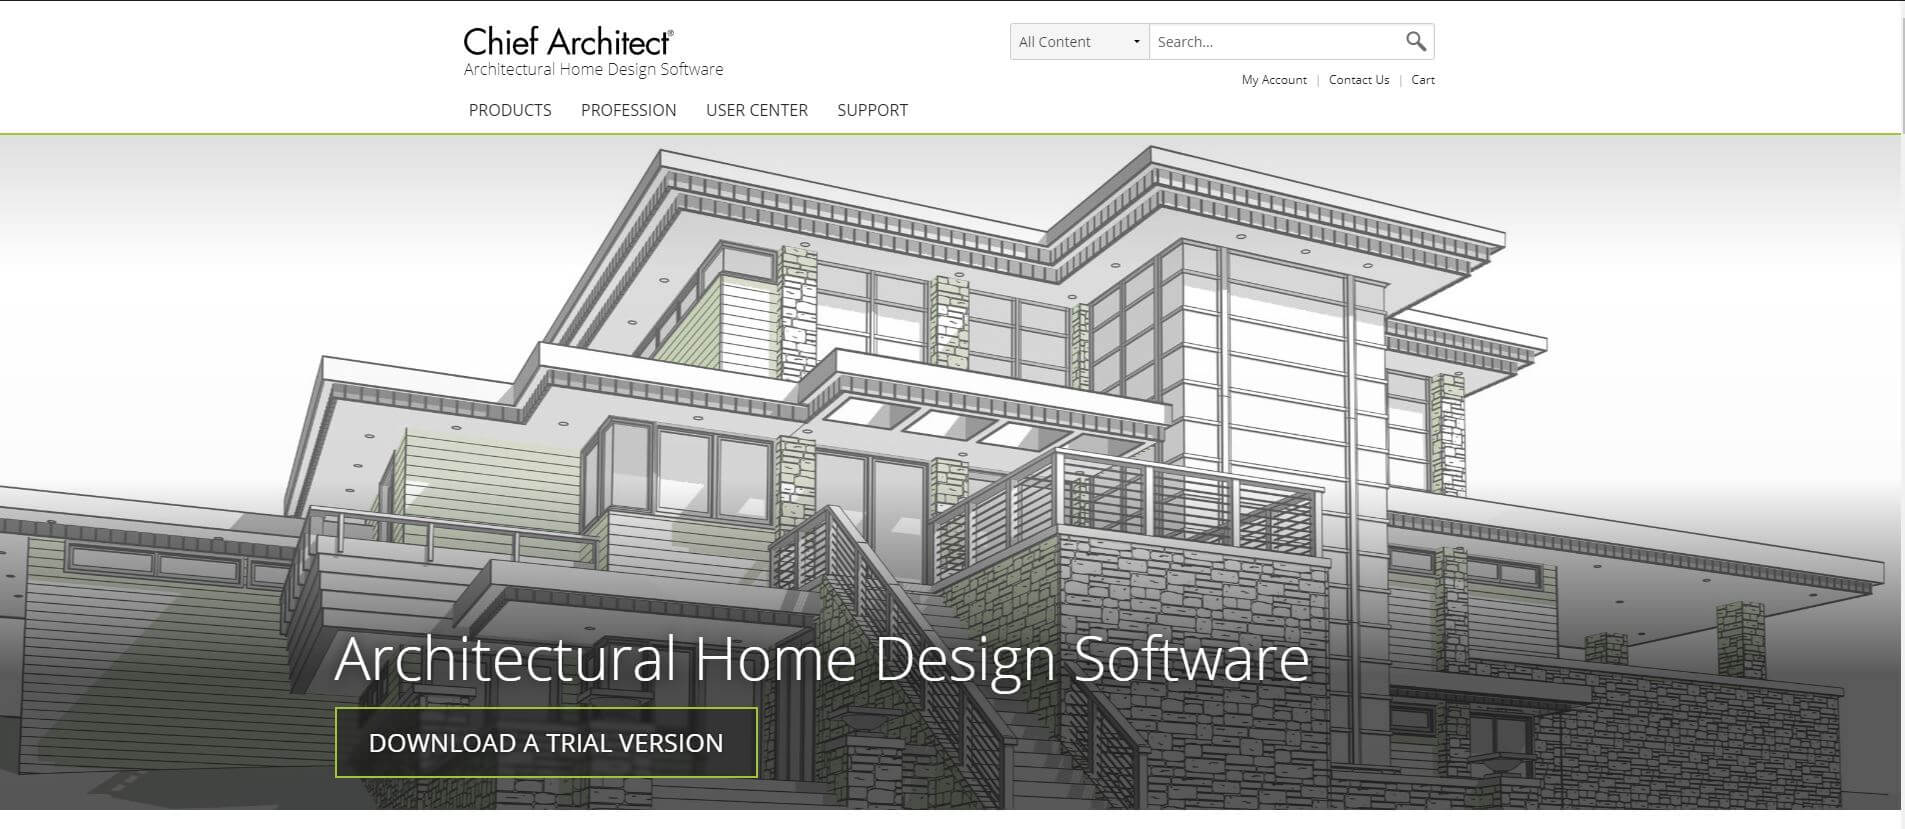 Chief Architect home page